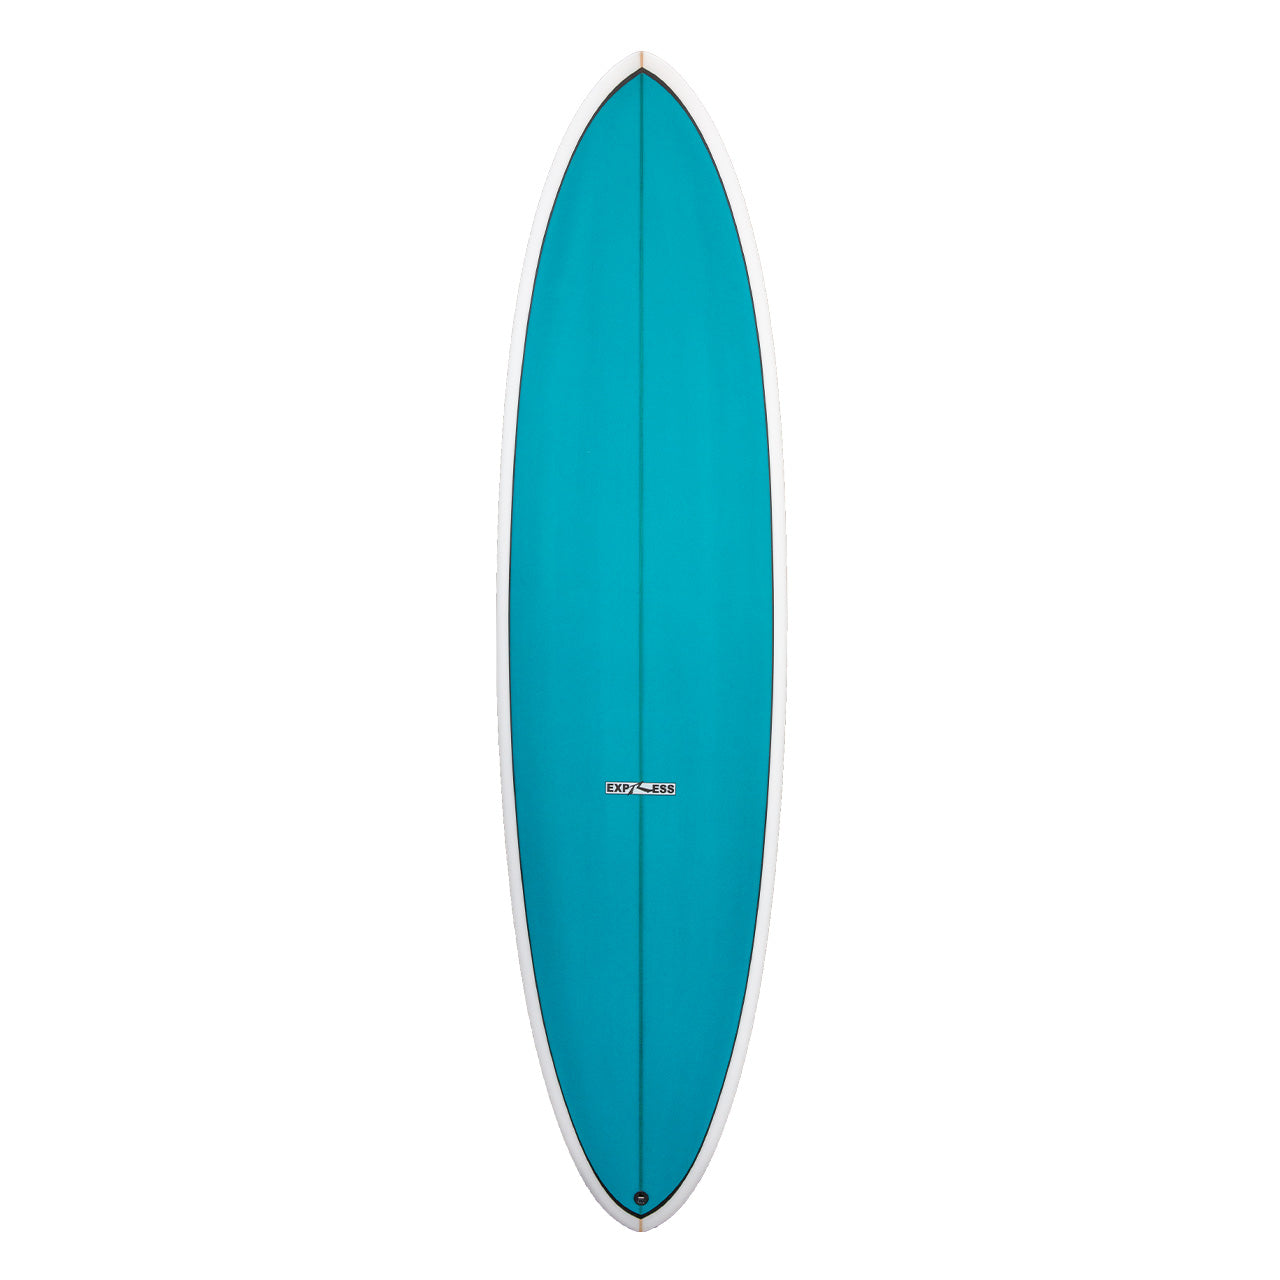 Express Midlength Surfboard - Teal - Deck -Rusty Surfboards 